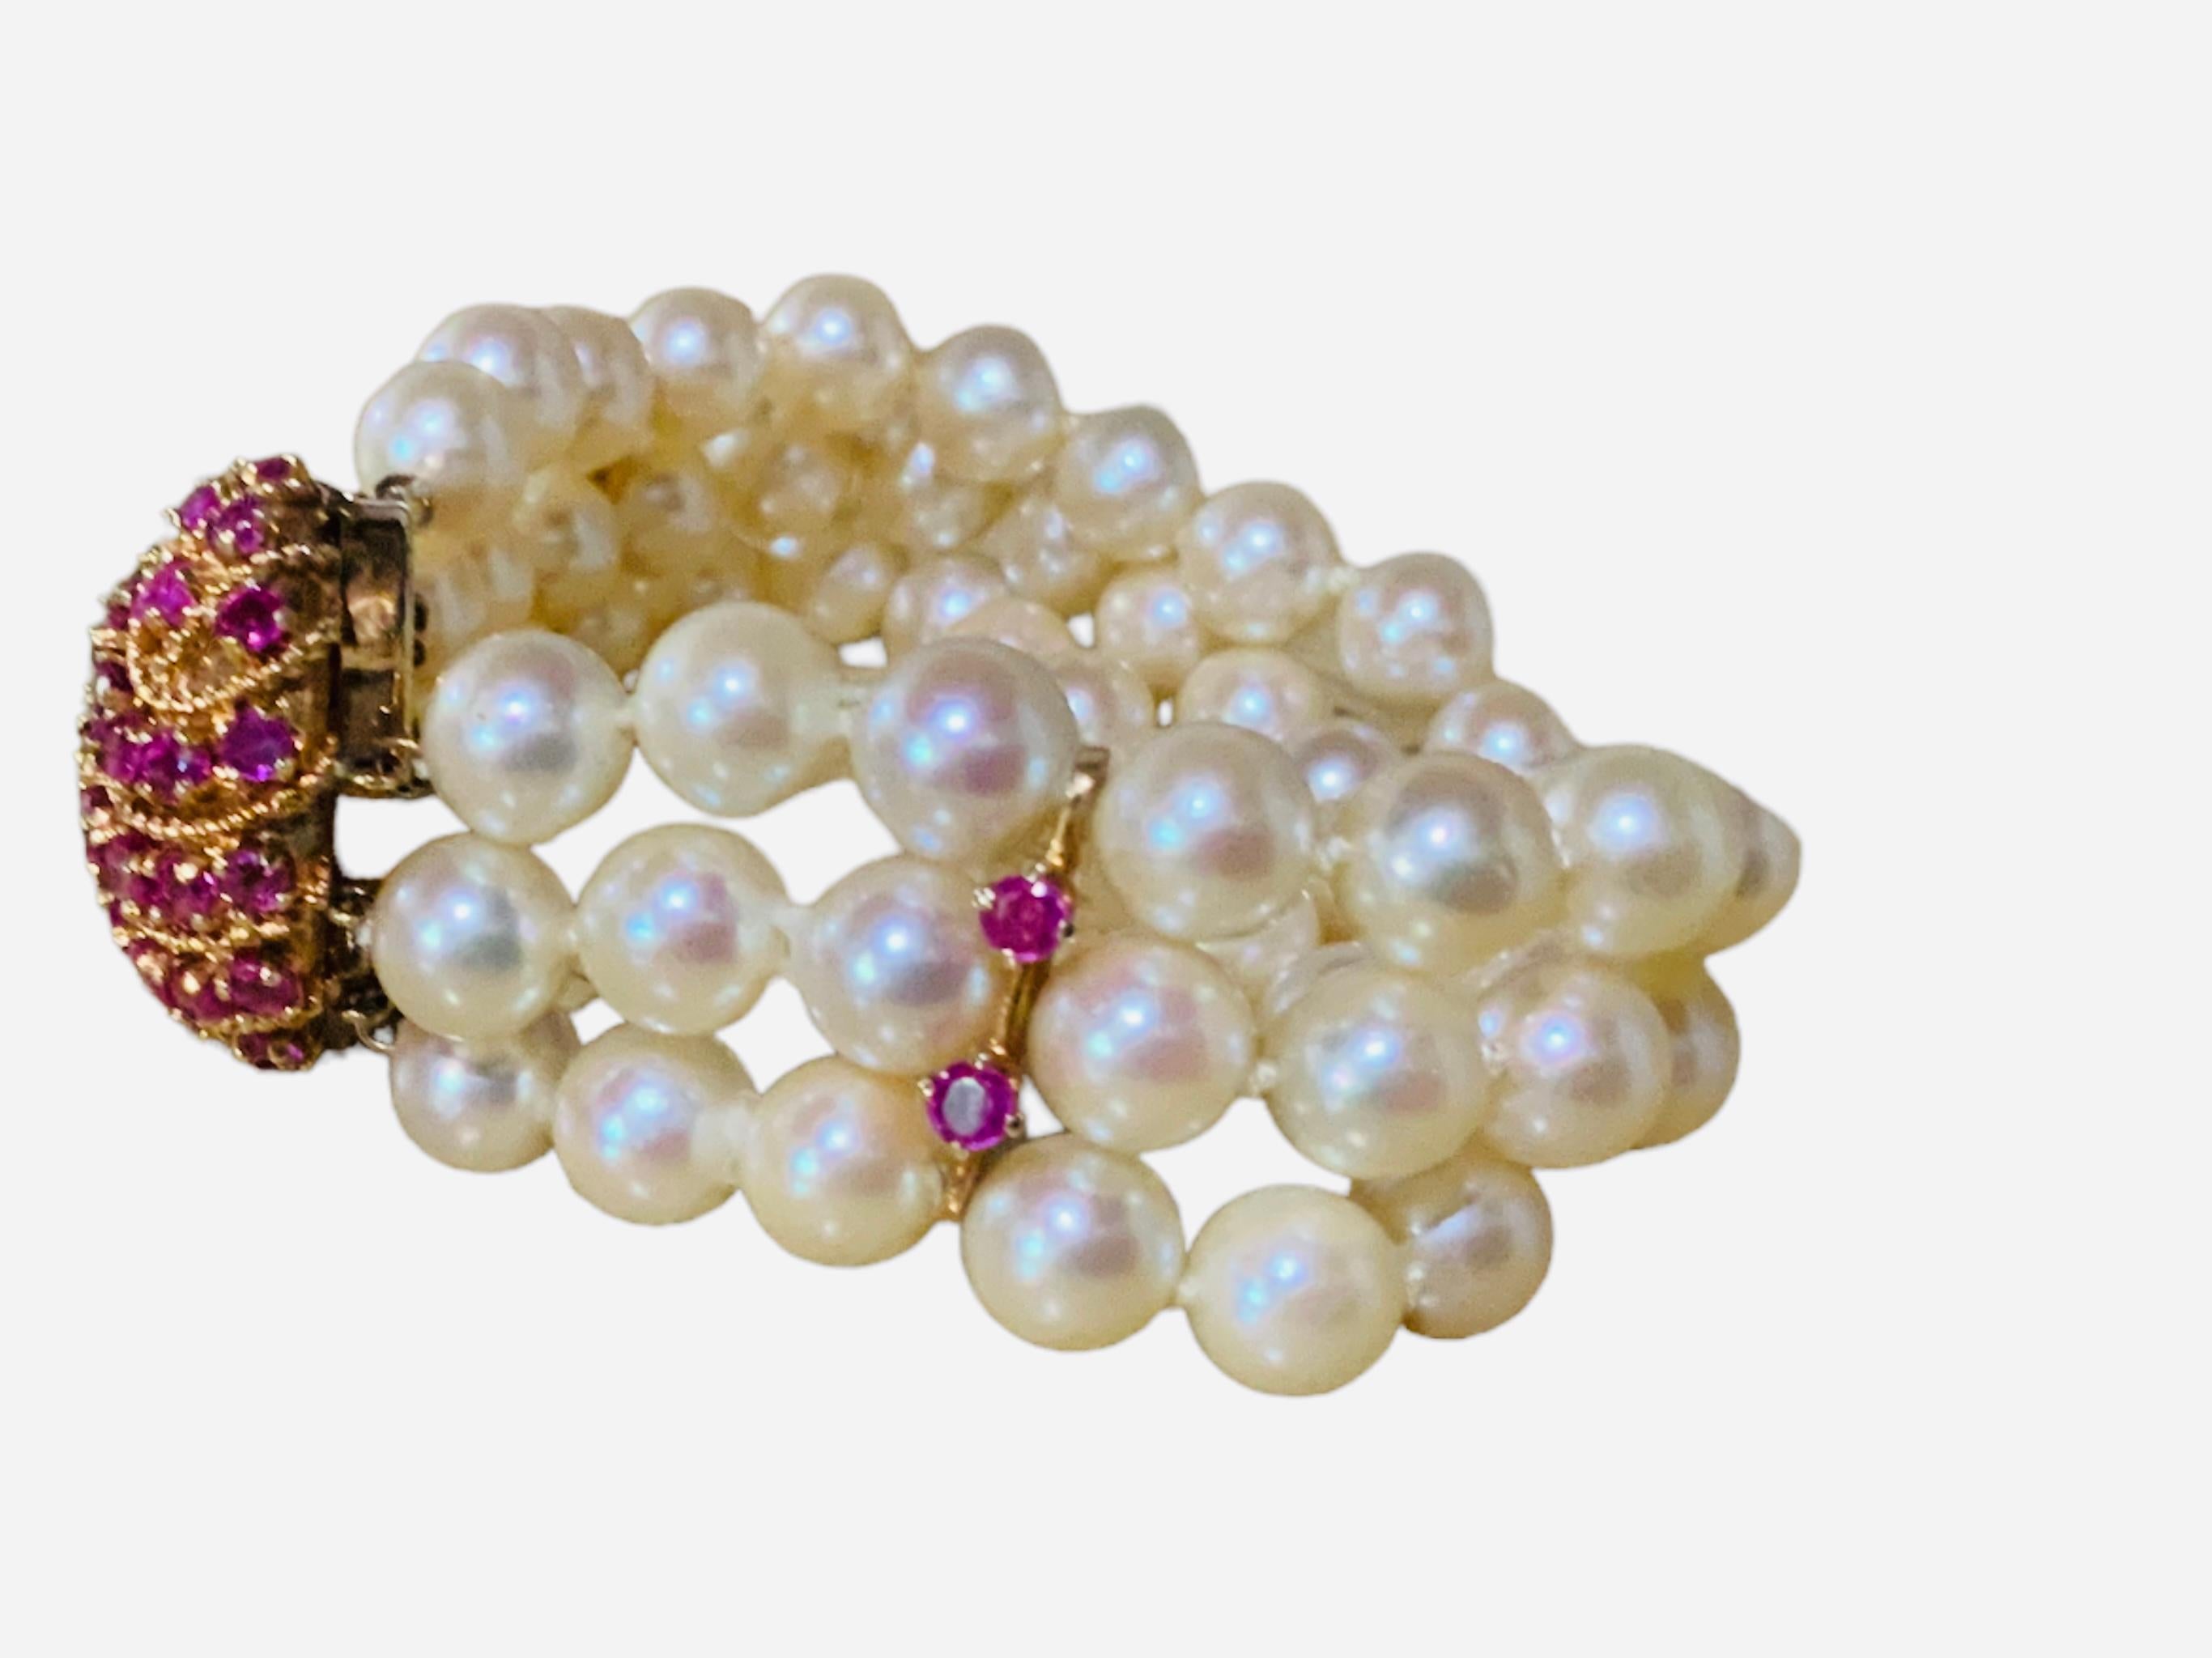 Japanese 14k Gold Culture Pearls and Rubies Bracelet In Good Condition For Sale In Guaynabo, PR